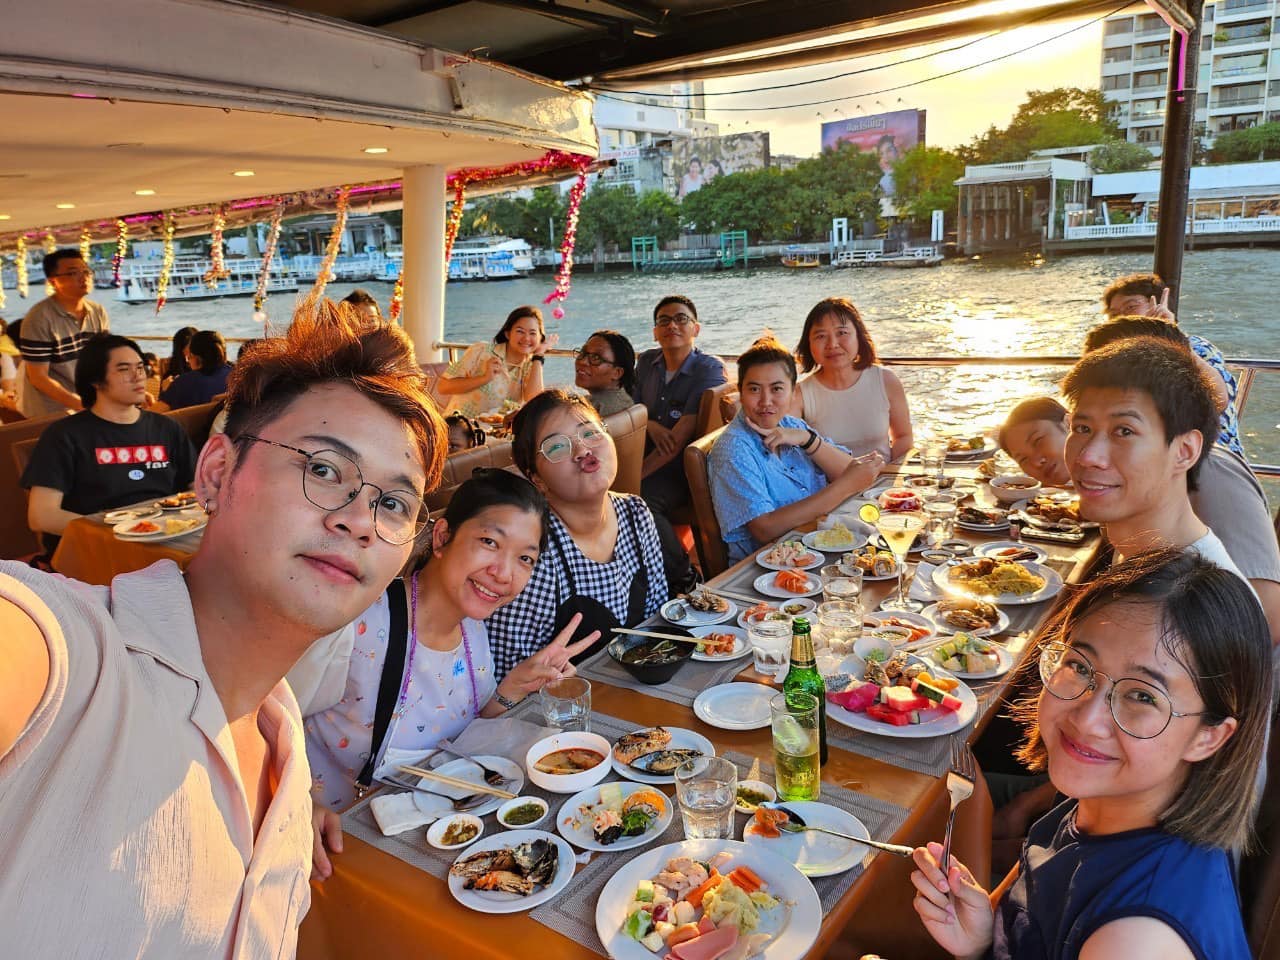 As the year comes to a close, CASB gathered for an unforgettable New Year's dinner along the enchanting Chao Phraya River in the heart of Bangkok. The evening was more than just a celebration; it was a heartfelt "Thank You" to the incredible team for their hard work, dedication, and unwavering support throughout the year.